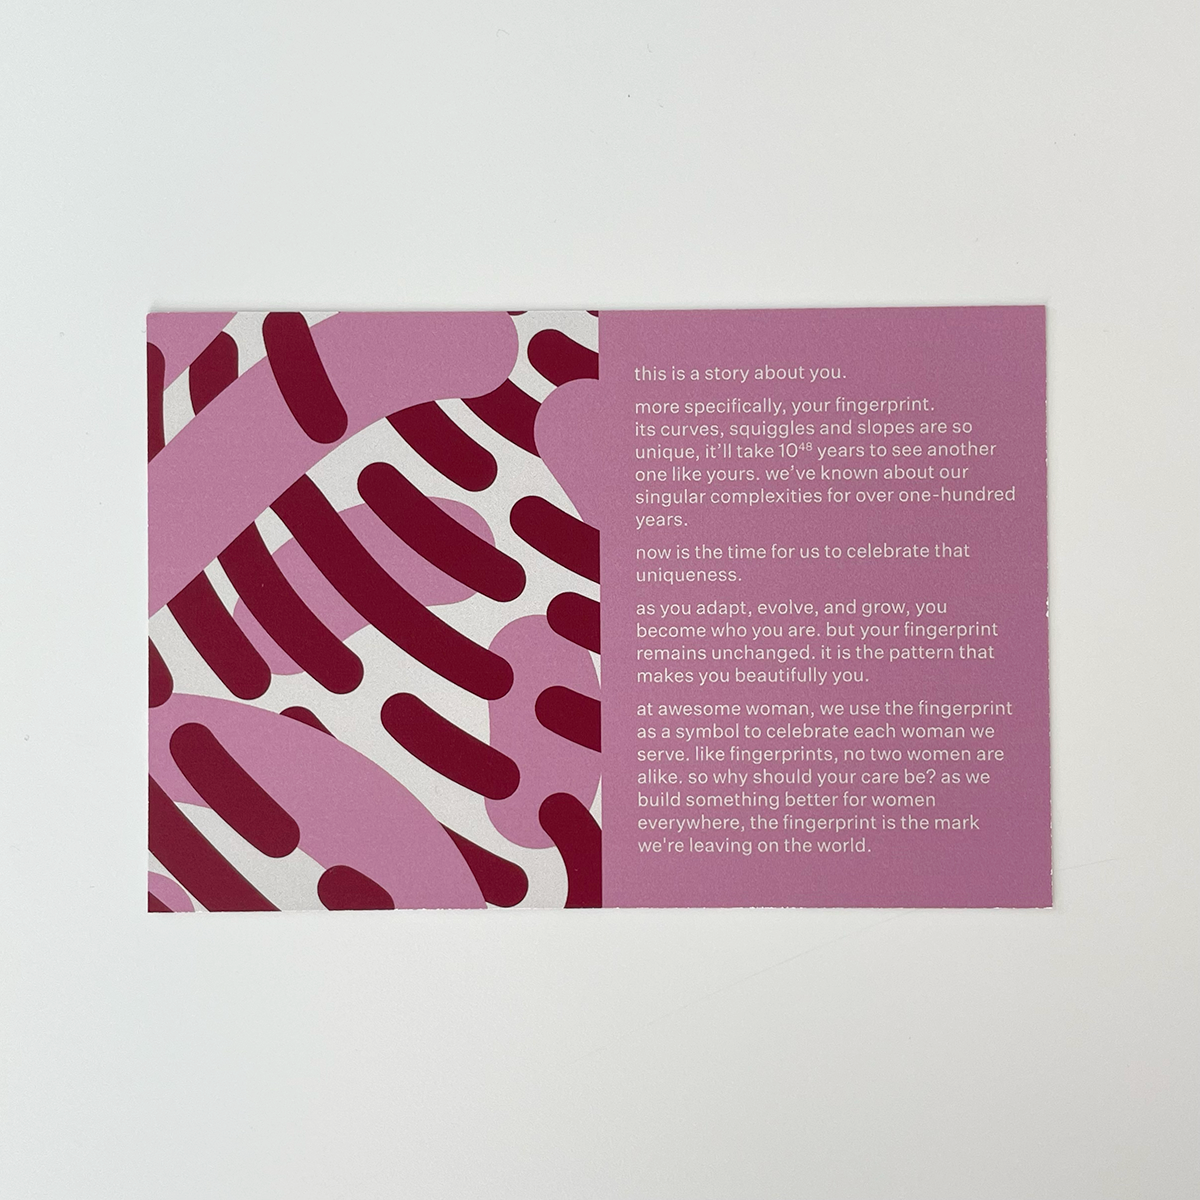 white, maroon, and pink information card about Awesome Woman